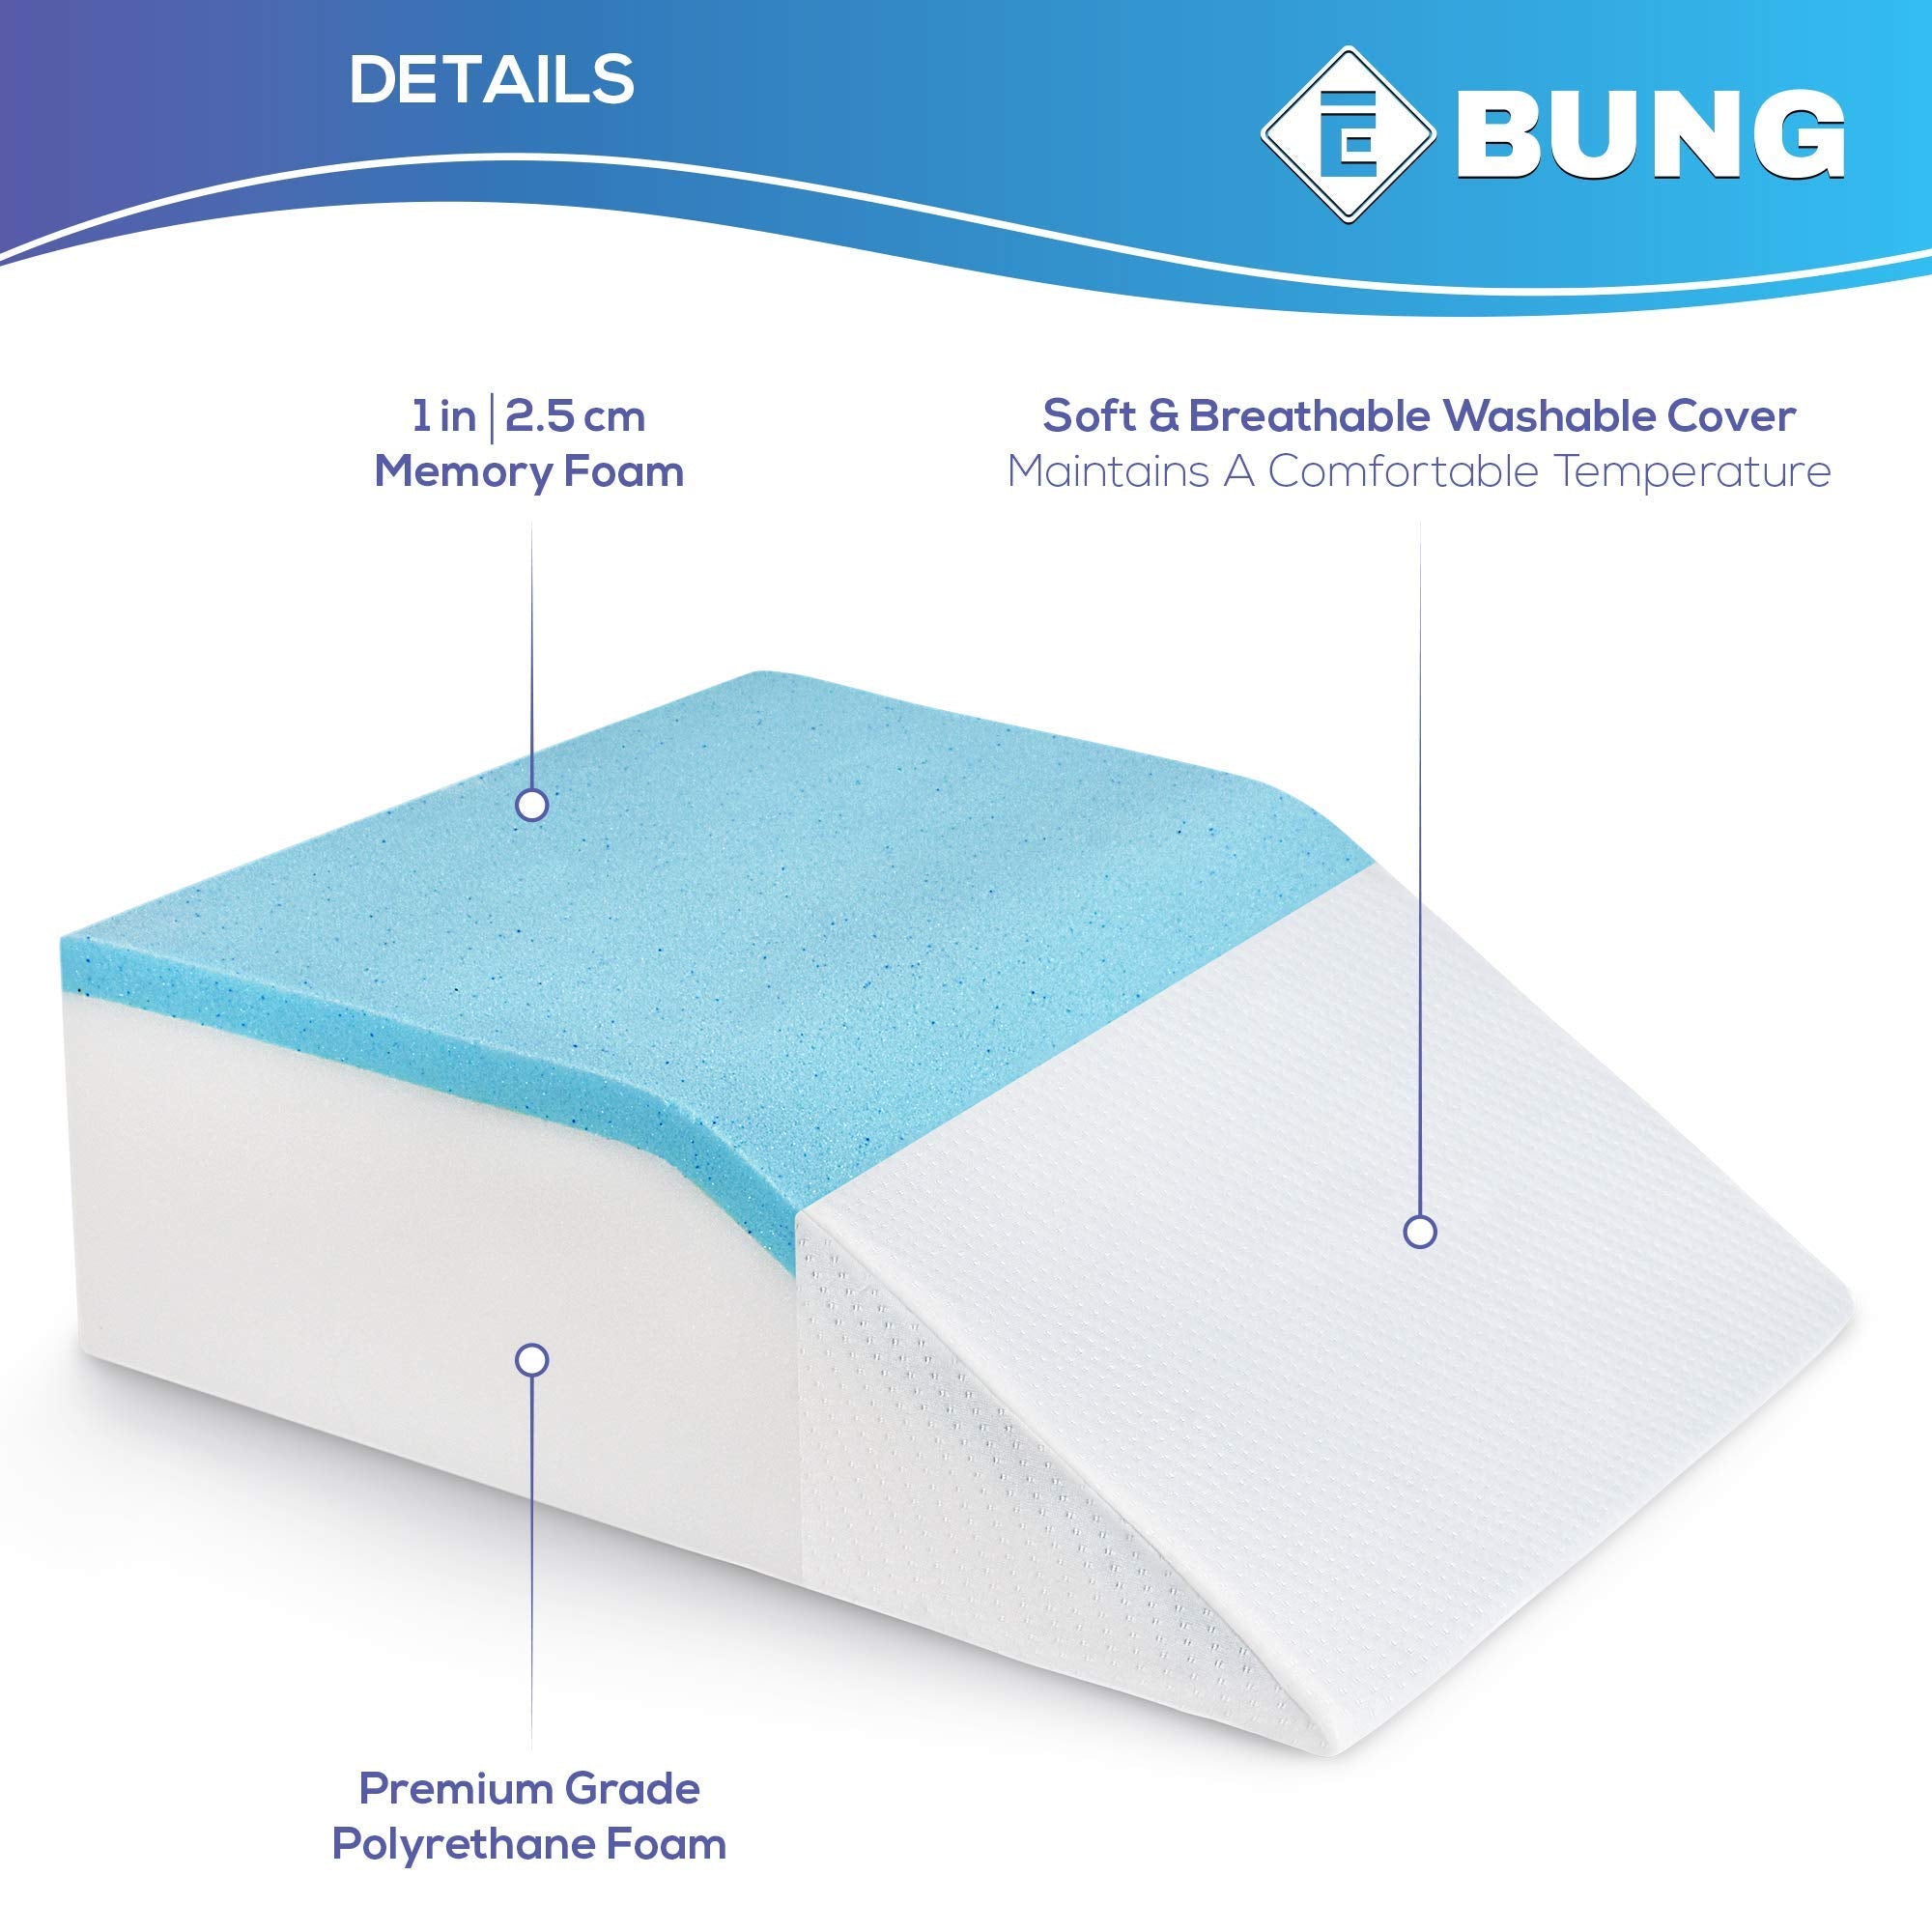 Ebung Leg Elevation Memory Foam Pillow with Removeable, Washable Cover  - Very Good